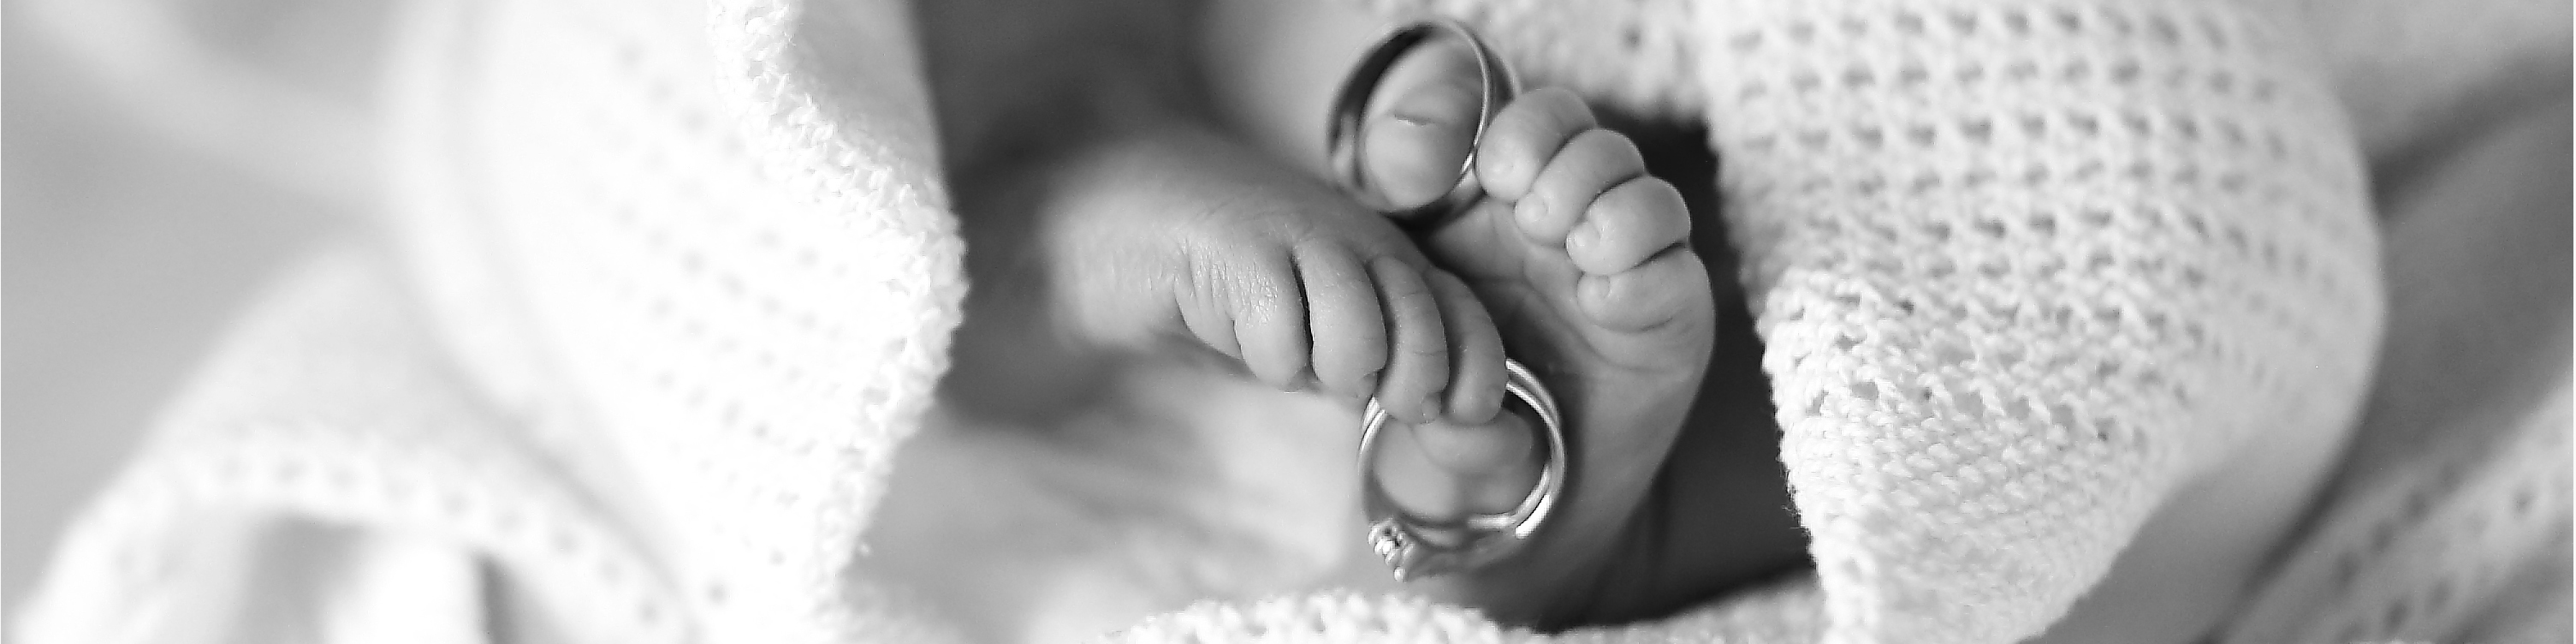 Black and white photograph of Baby feet and wedding rings